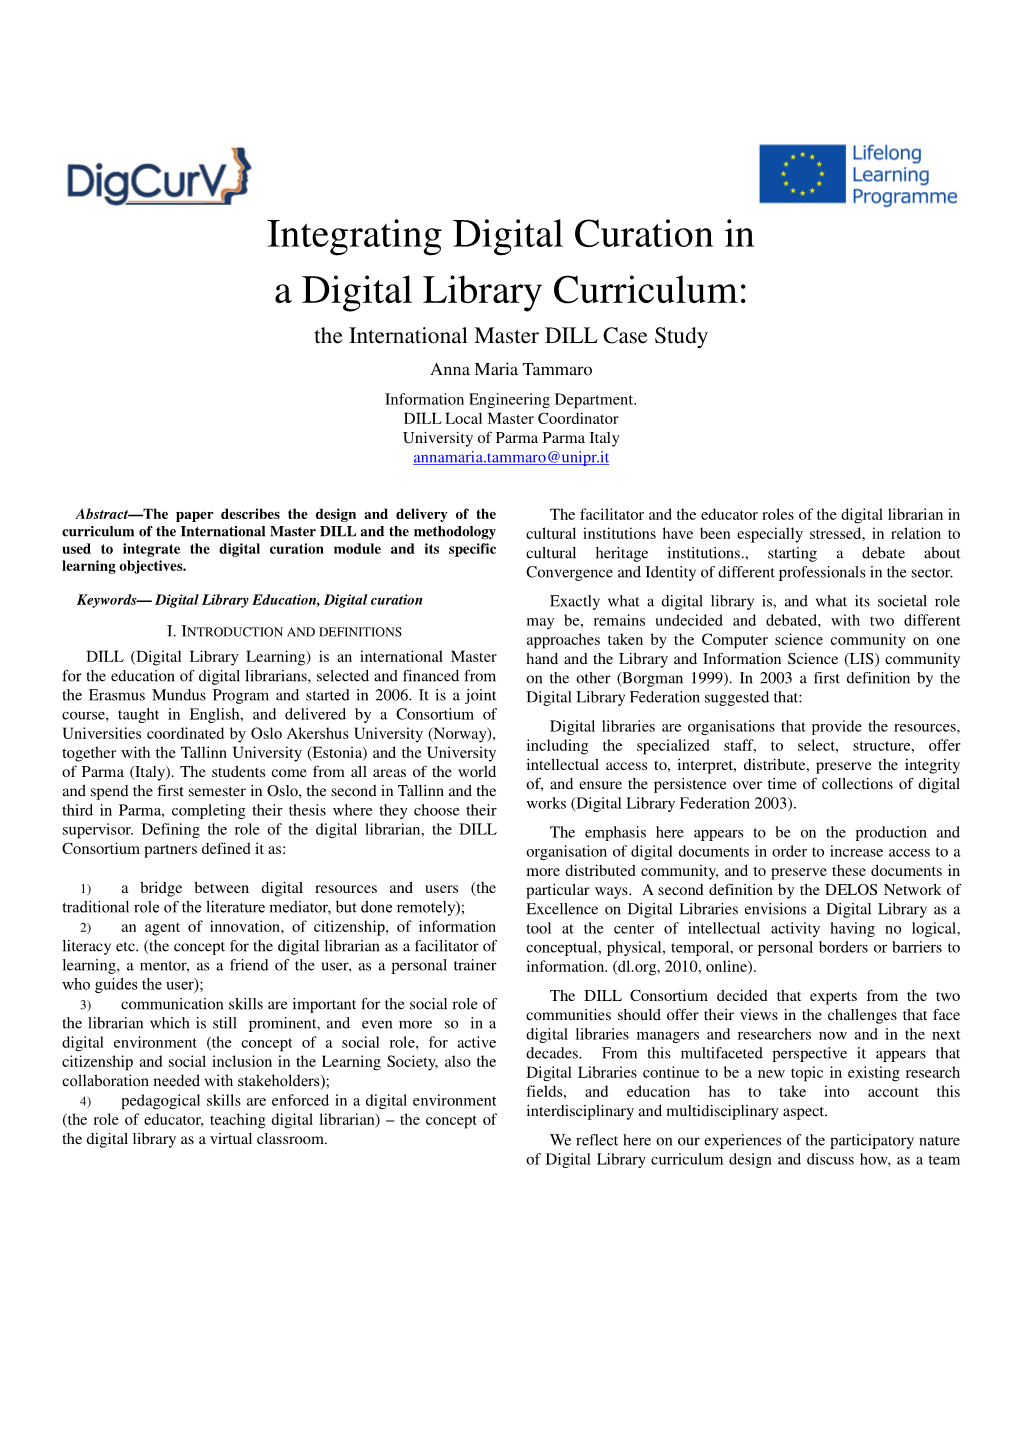 Integrating Digital Curation in a Digital Library Curriculum: the International Master DILL Case Study Anna Maria Tammaro Information Engineering Department